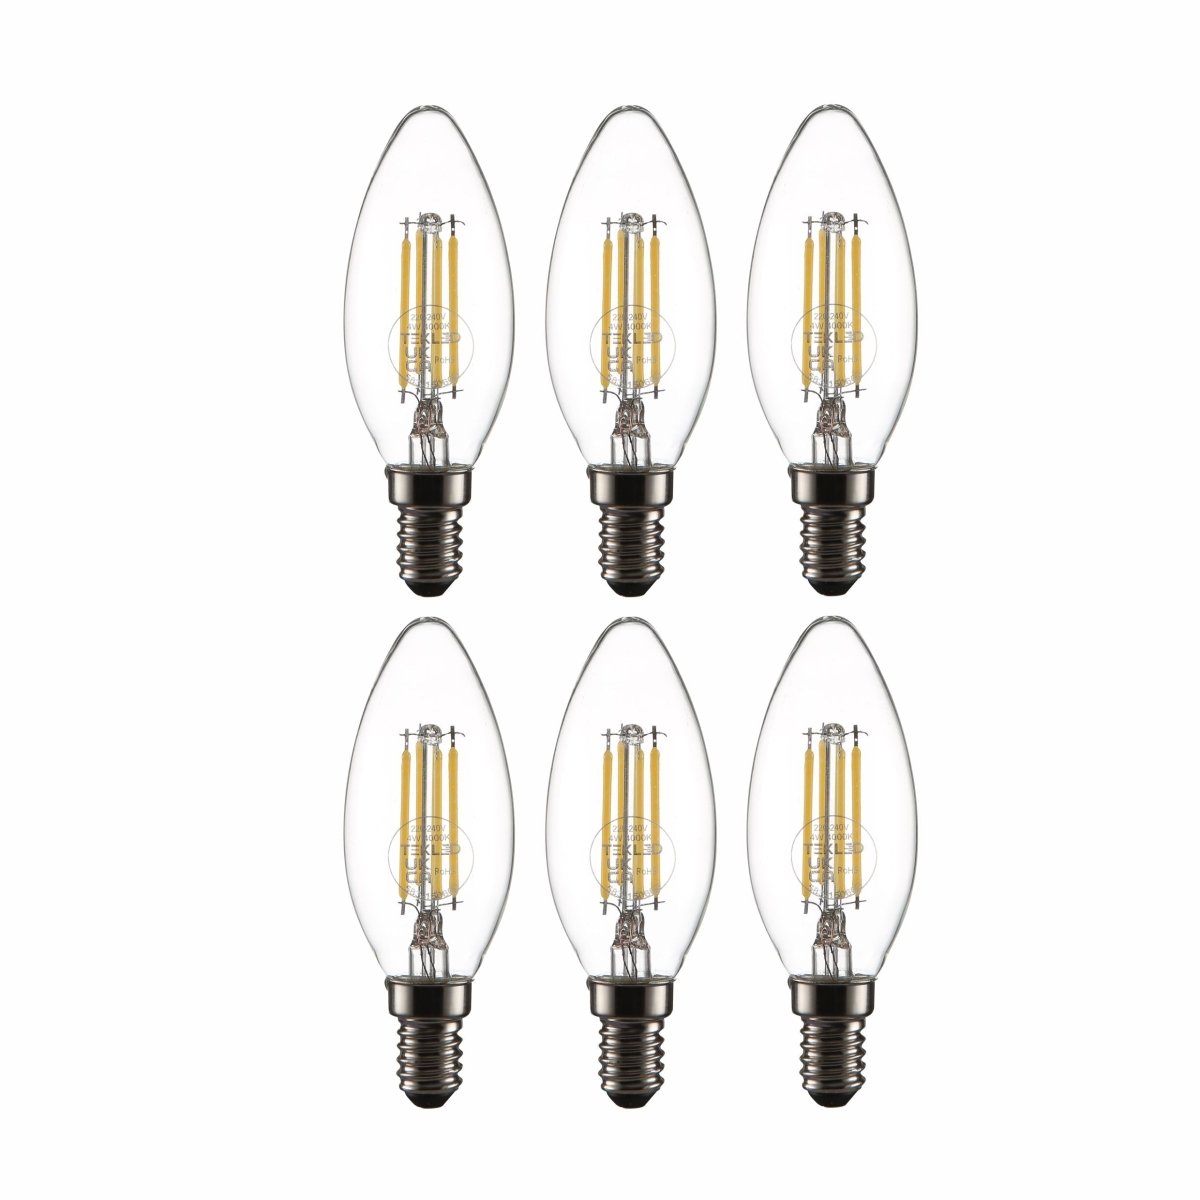 Main image of LED Filament Bulb C35 Candle E14 Small Edison Screw 4W 470lm Cool White 4000K Clear Pack of 6 | TEKLED 583-150603